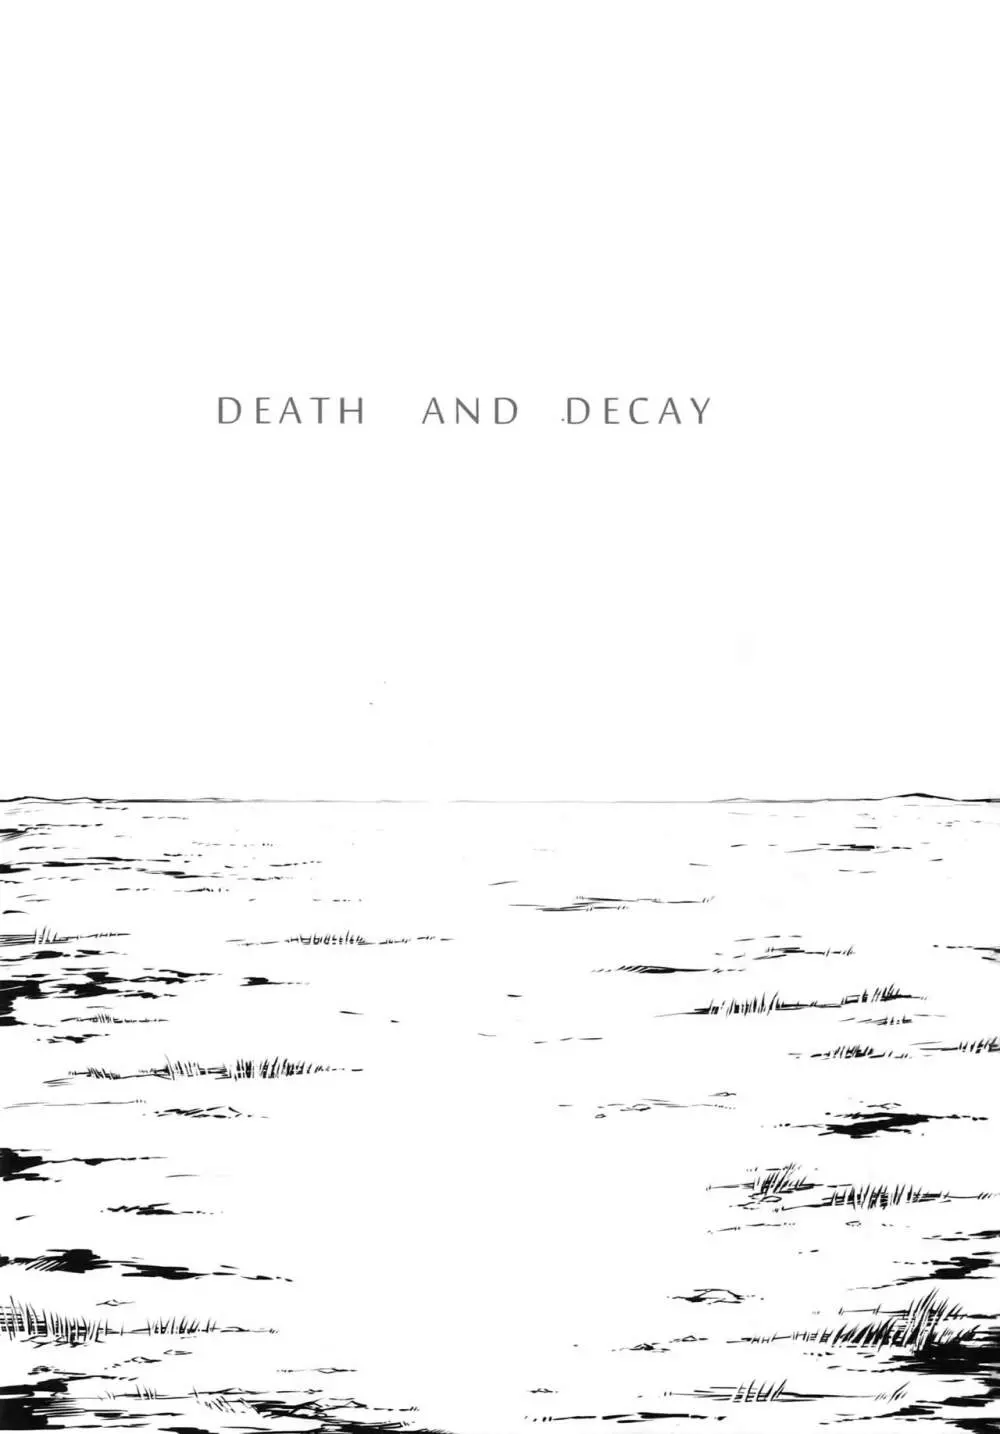 DEATH AND DECAY 2ページ